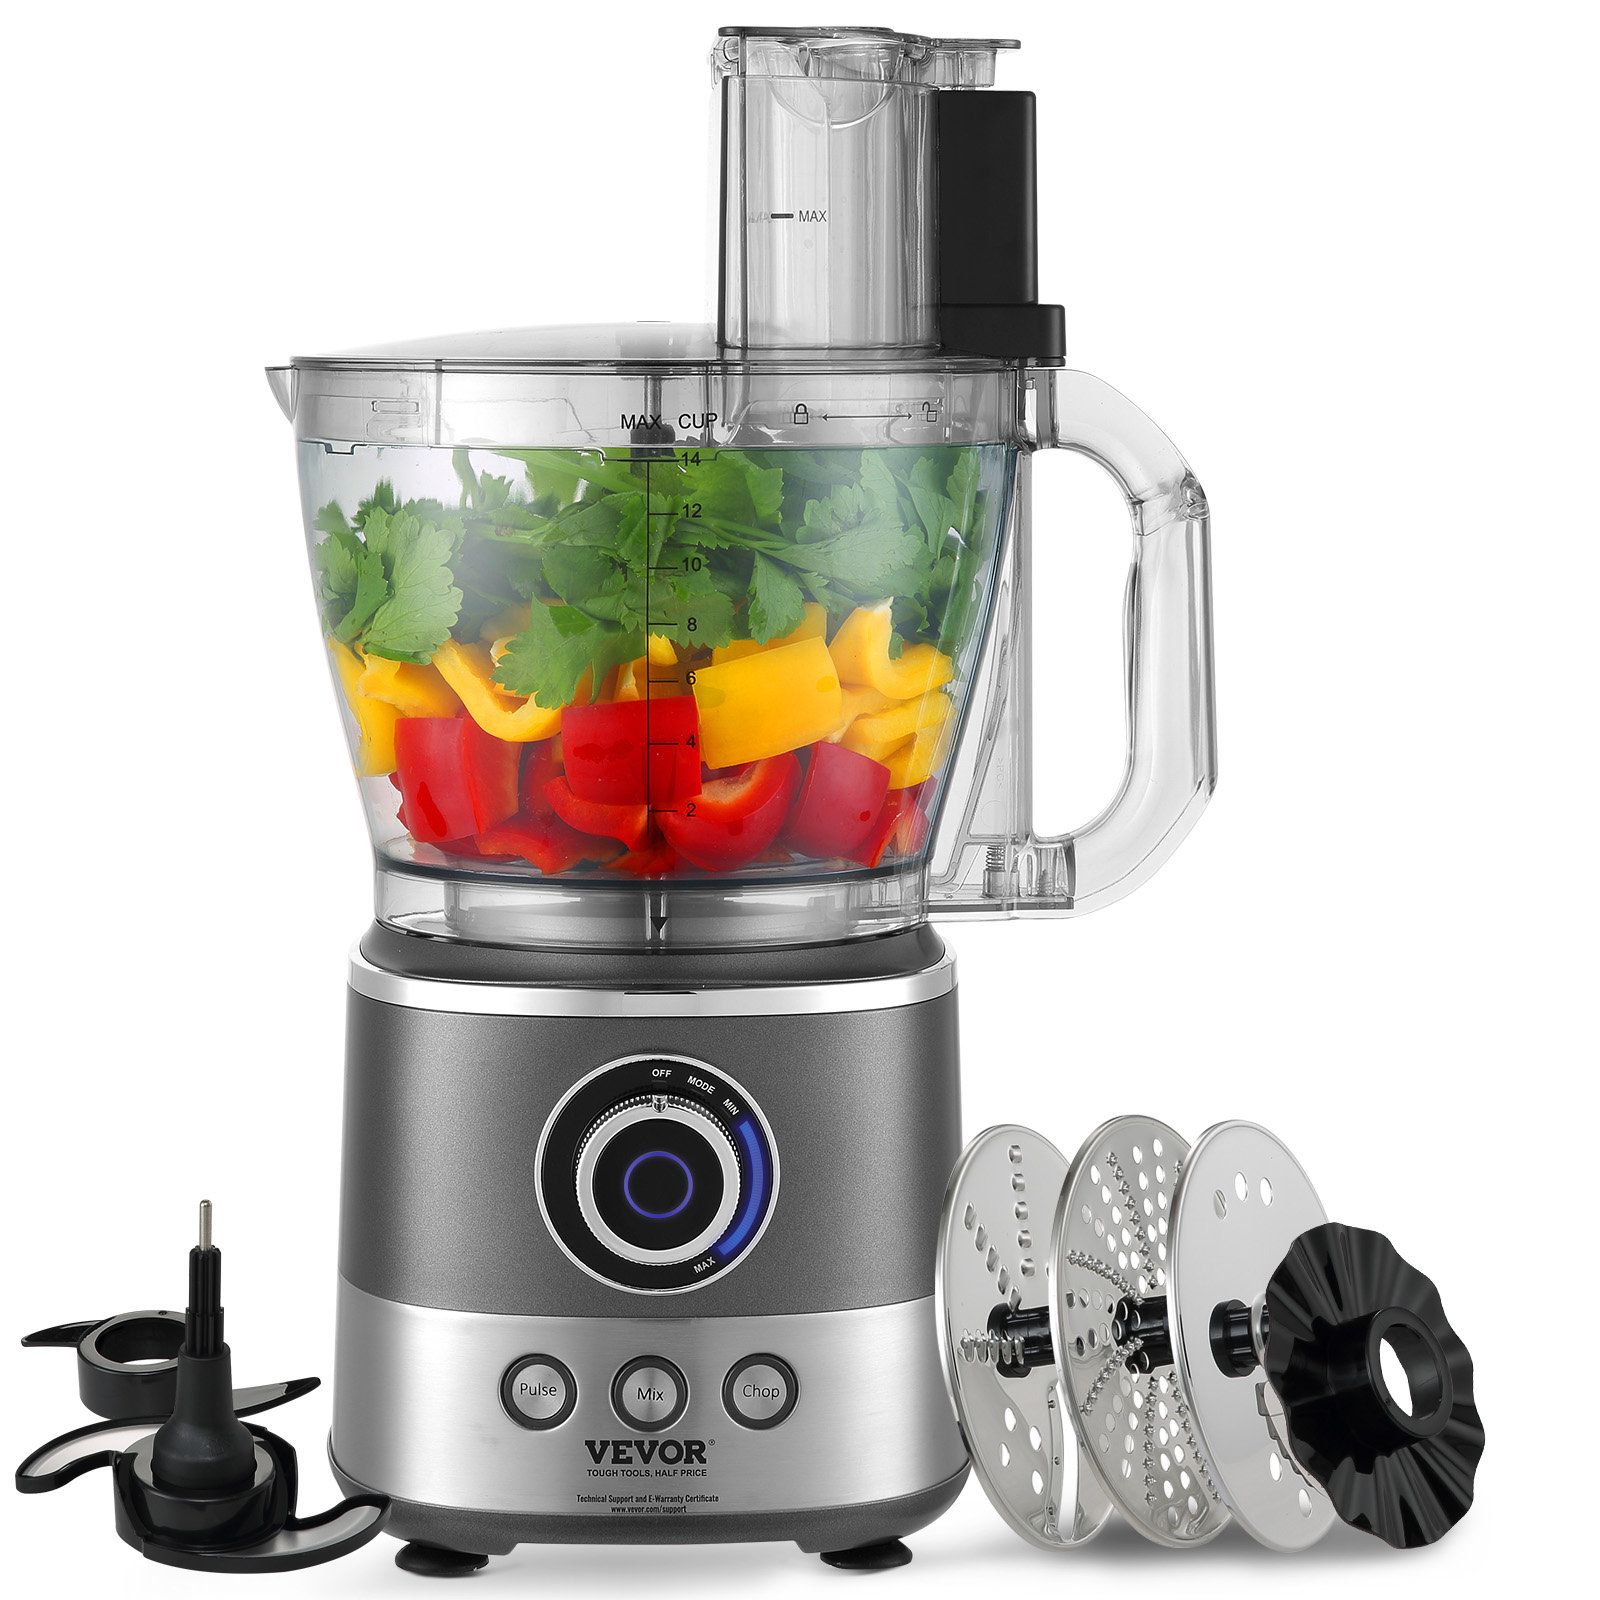 Hamilton Beach Food Processor & Vegetable Chopper for Slicing, Shredding,  Mincing, and Puree, 10 Cups + Easy Clean Bowl Scraper, Black and Stainless